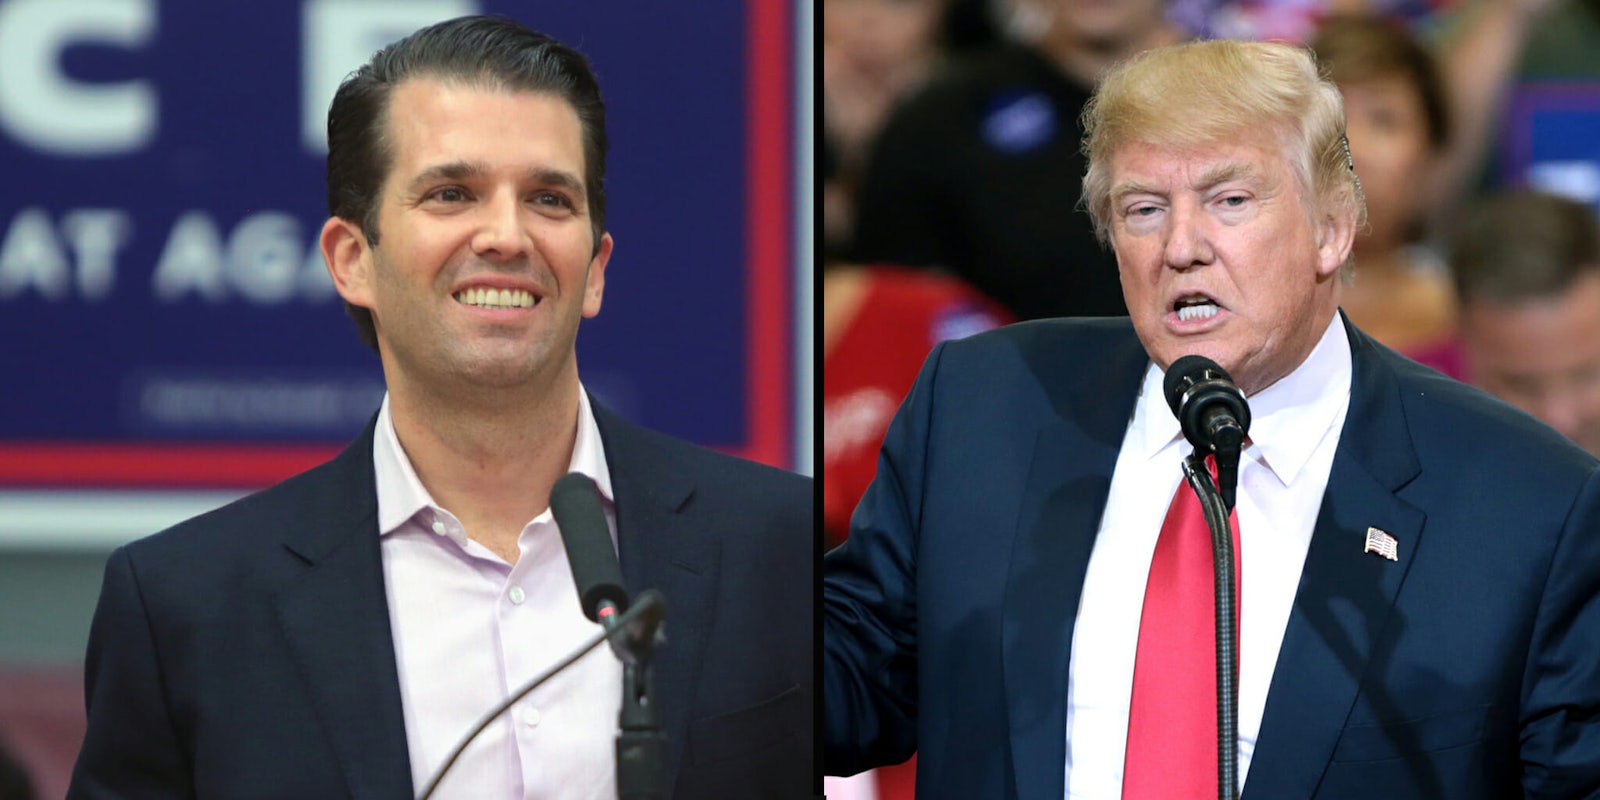 Members of President Donald Trump's campaign–including Trump and his son Donald Trump Jr.–were sent an email in September 2016 with a link to a website with hacked Wikileaks documents and decryption key, according to a new report.